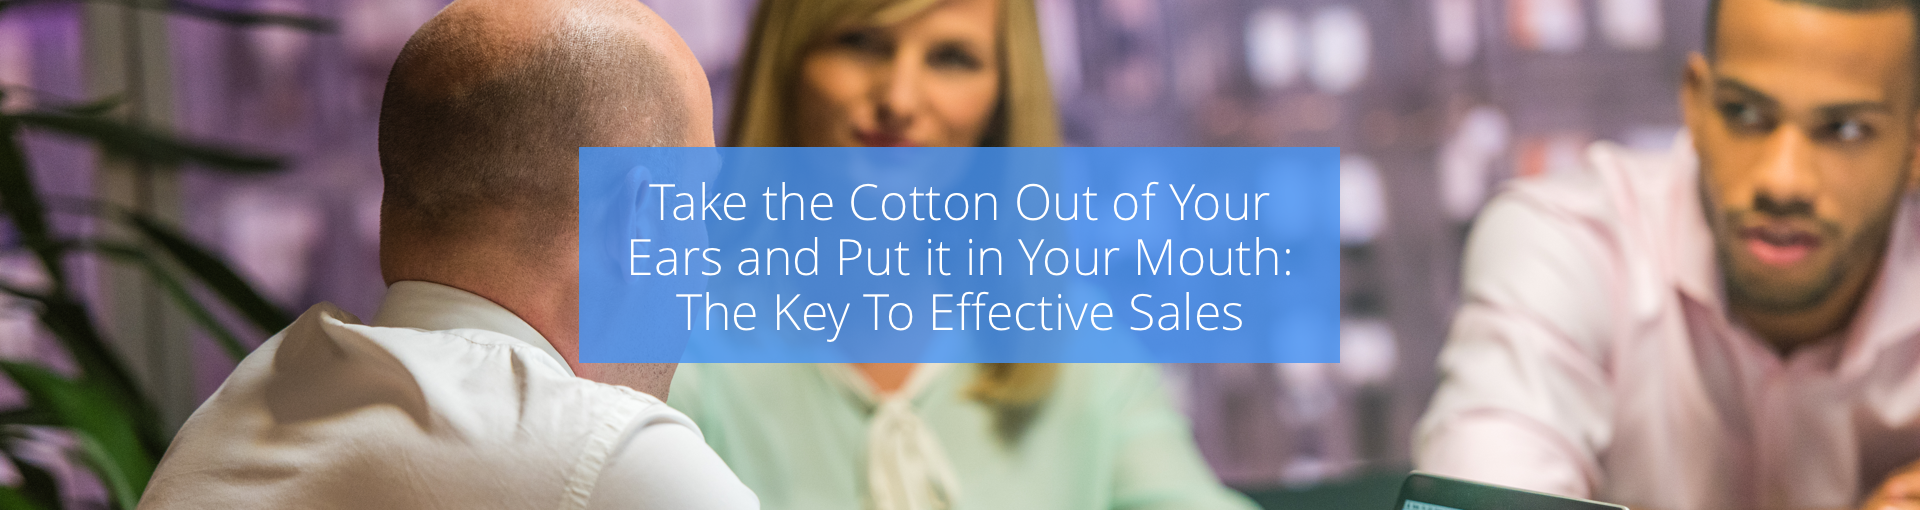 Take the Cotton Out of Your Ears and Put it in Your Mouth: The Key To Effective Sales Featured Image